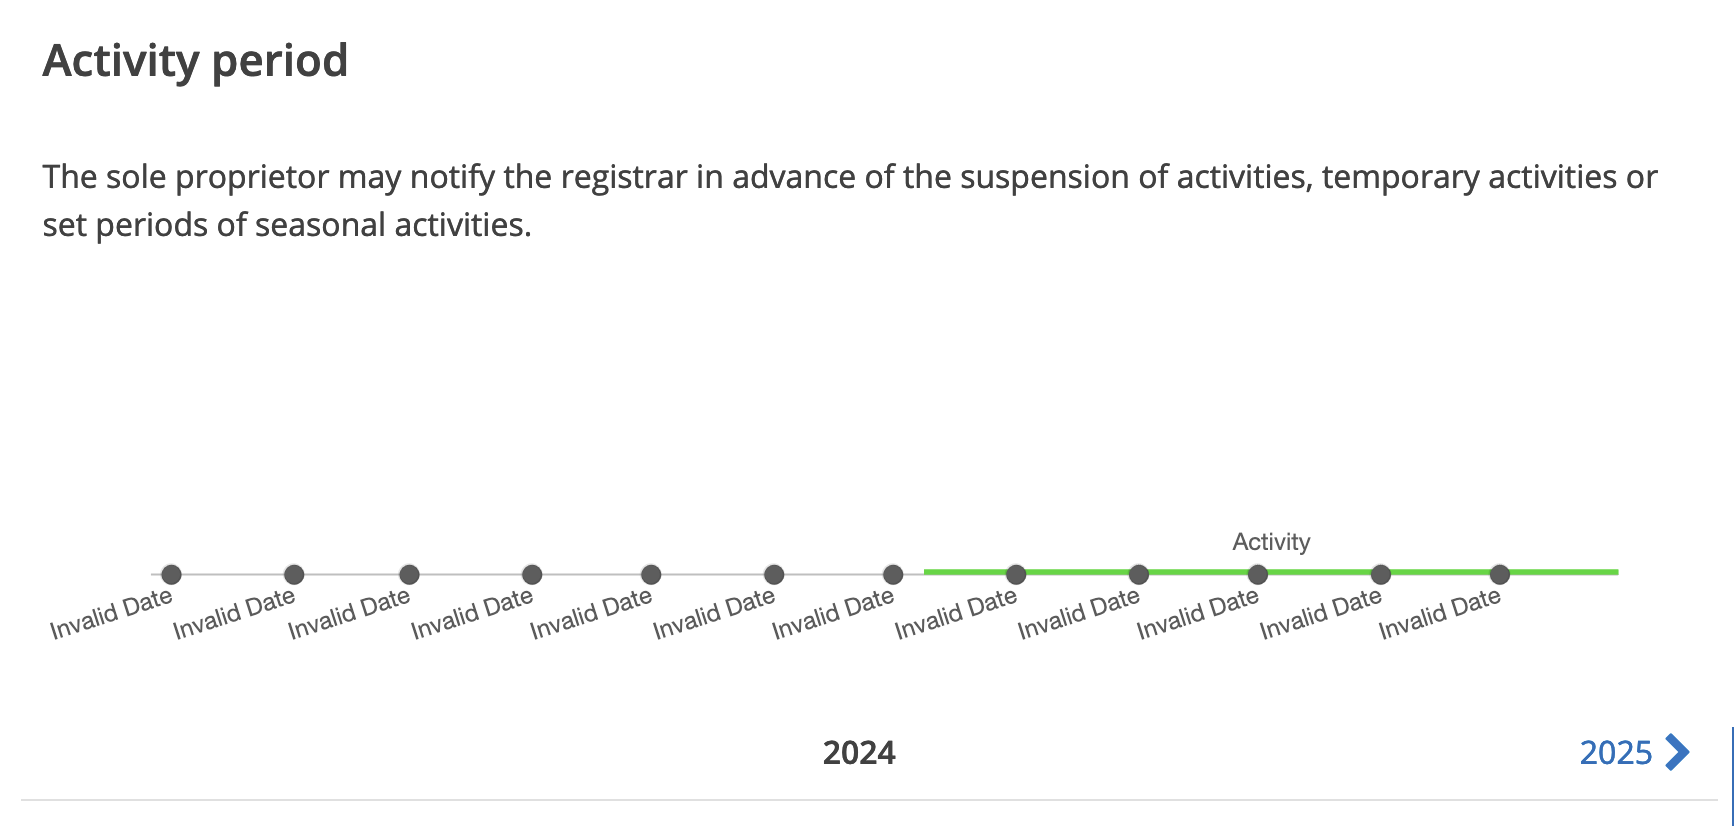 Screenshot of a website. The title is "Activity period". Text underneath reads: "The sole proprietor may notify the registrar in advance of the suspension of activities, temporary activities or set periods of seasonal activities. Below that is a timeline with "2024" underneath it, and 12 points marked along the timeline. All 12 points have the legend "Invalid Date".